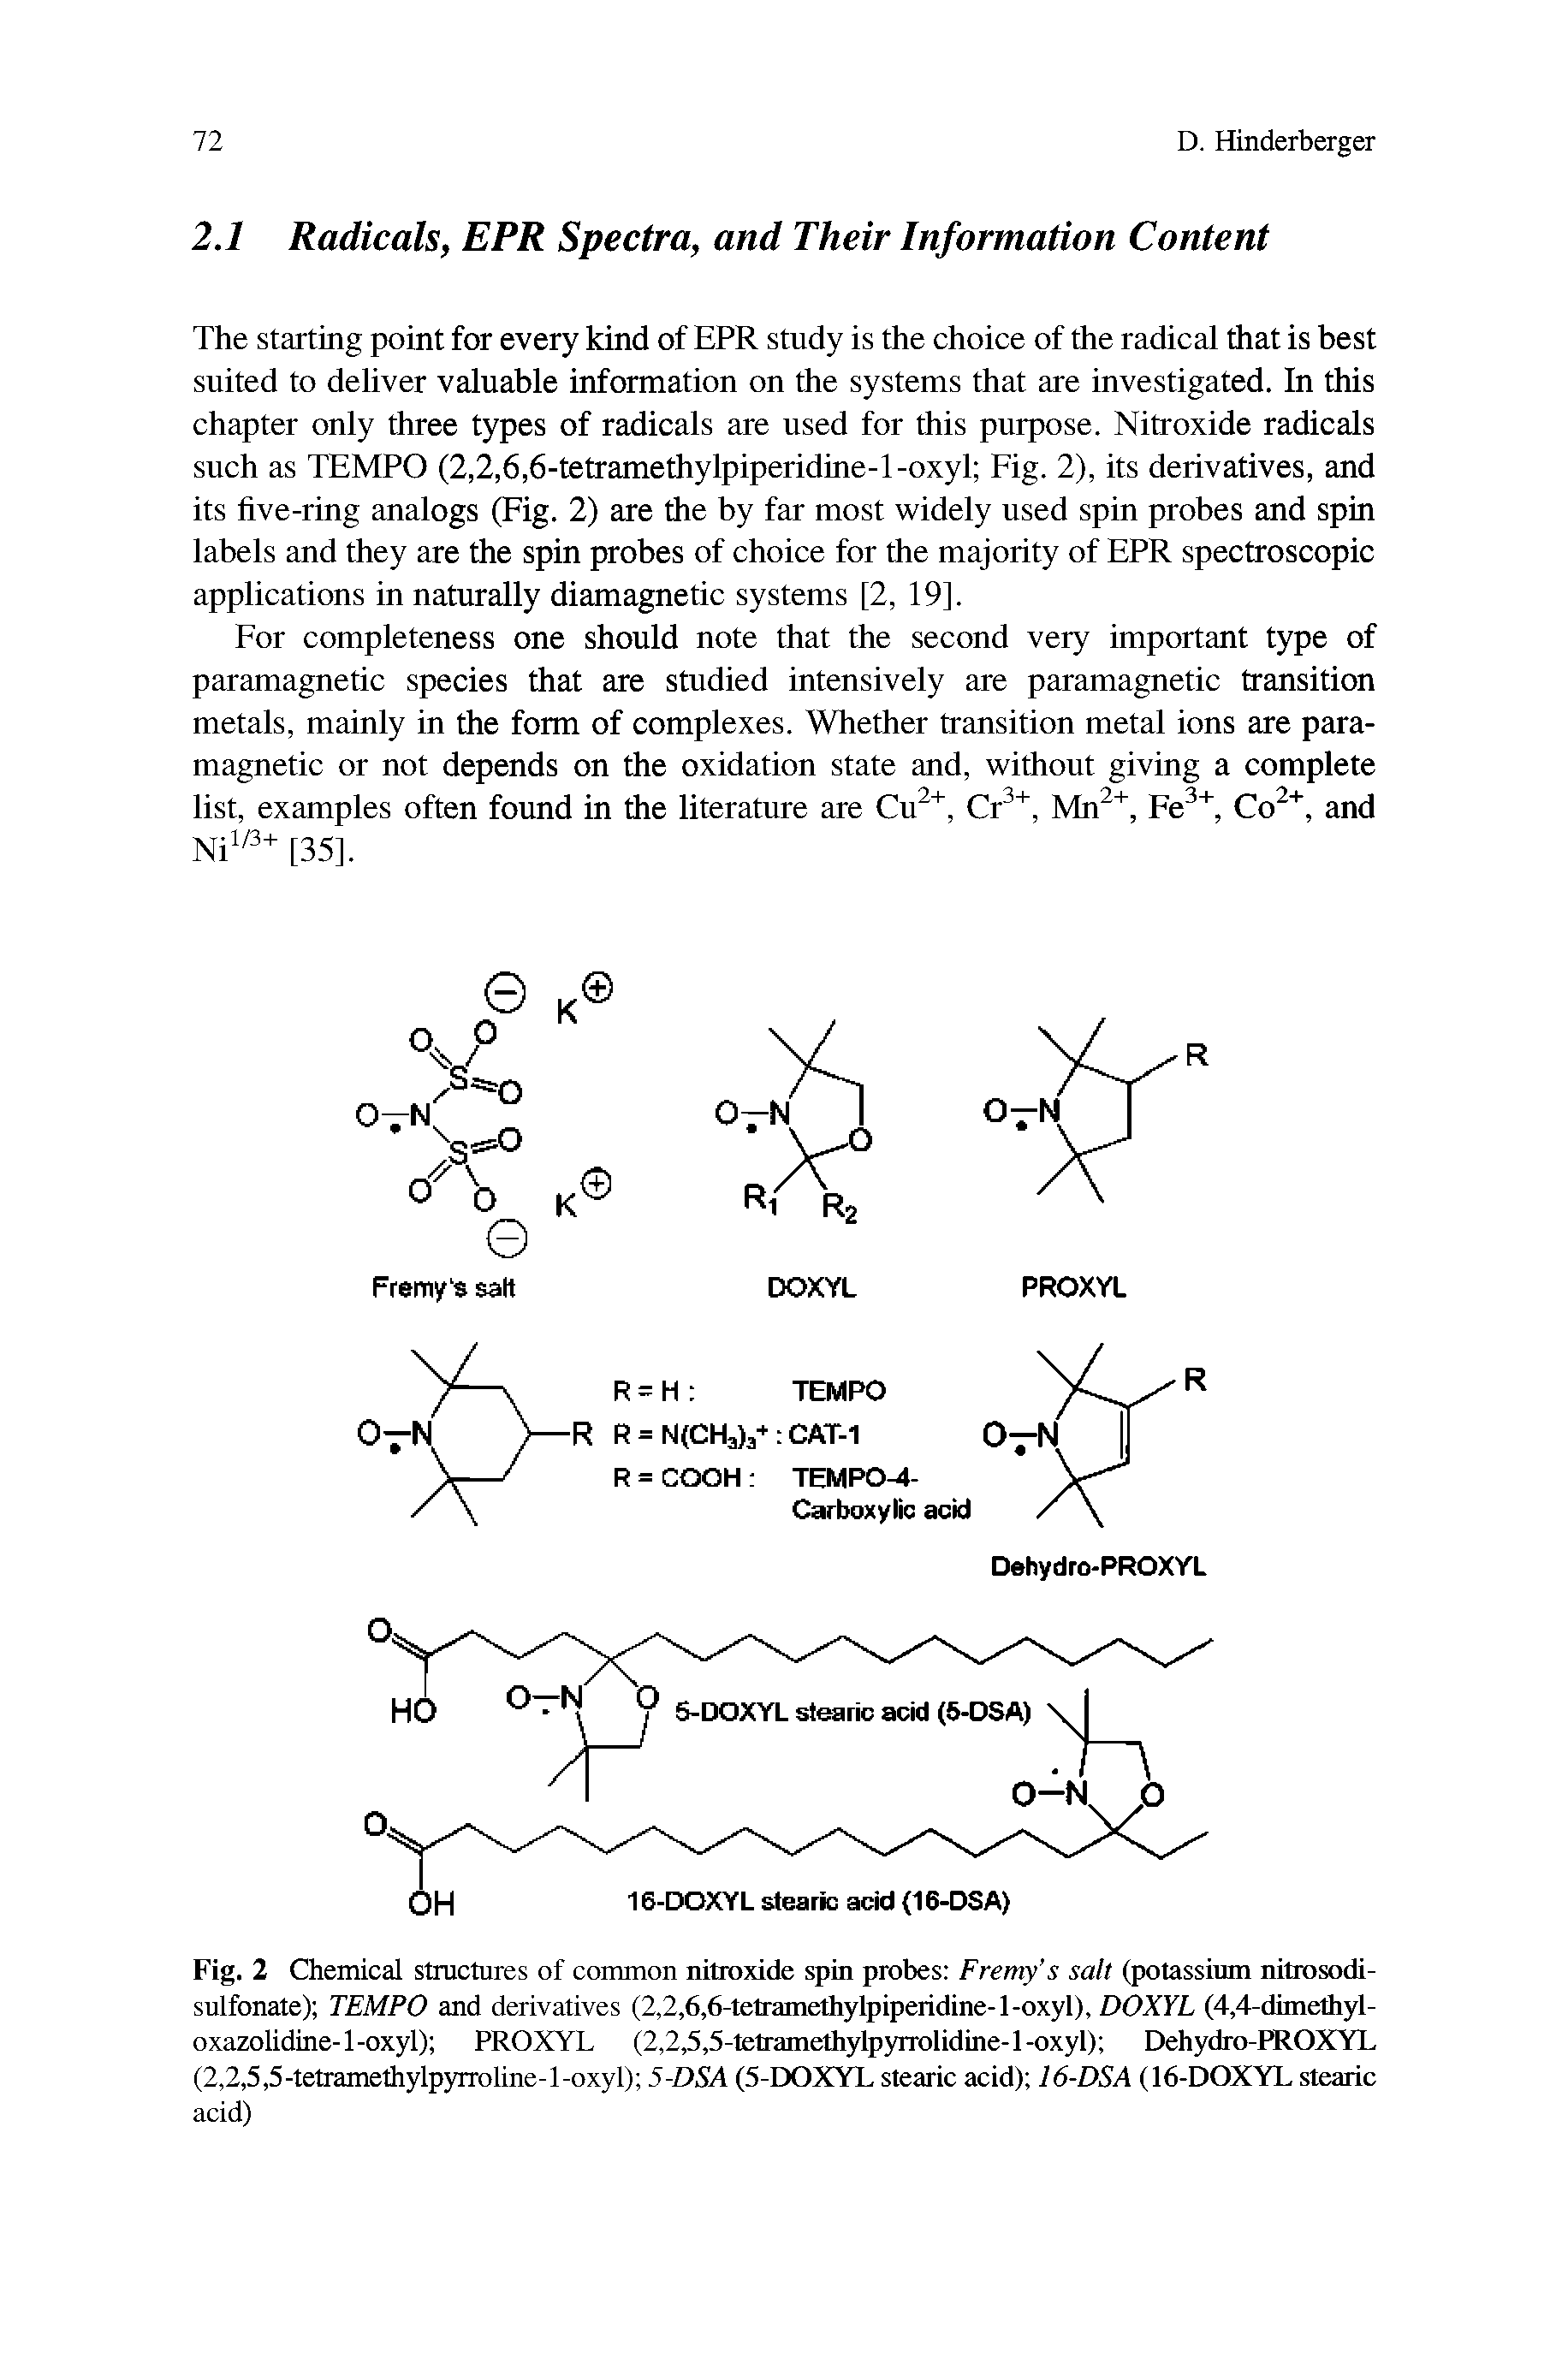 Fig. 2 Chemical structures of common nitroxide spin probes Fremy s salt (potassium nitrosodi-sulfonate) TEMPO and derivatives (2,2,6,6-tetramethylpiperidine-l-oxyl), DOXYL (4,4-dimethyl-oxazolidine-l-oxyl) PROXYL (2,2,5,5-tetramethylpyrrolidine-l-oxyl) Dehydro-PROXYL (2,2,5,5-tetramethylpyrroline-l-oxyl) 5-DSA (5-DOXYL stearic acid) 16-DSA (16-DOXYL stearic...